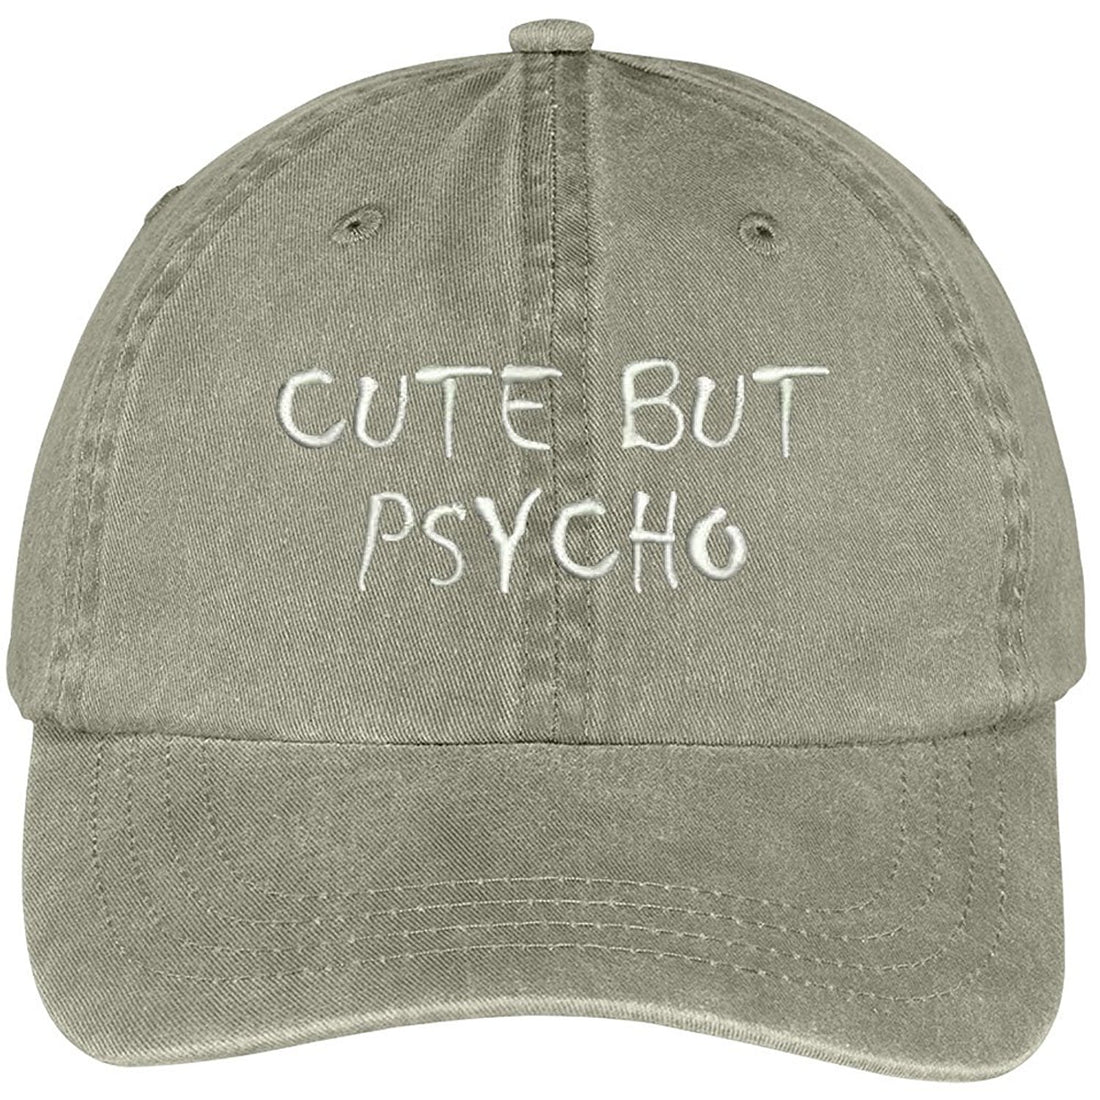 Trendy Apparel Shop Cute But Psycho Embroidered Washed Cotton Adjustable Cap